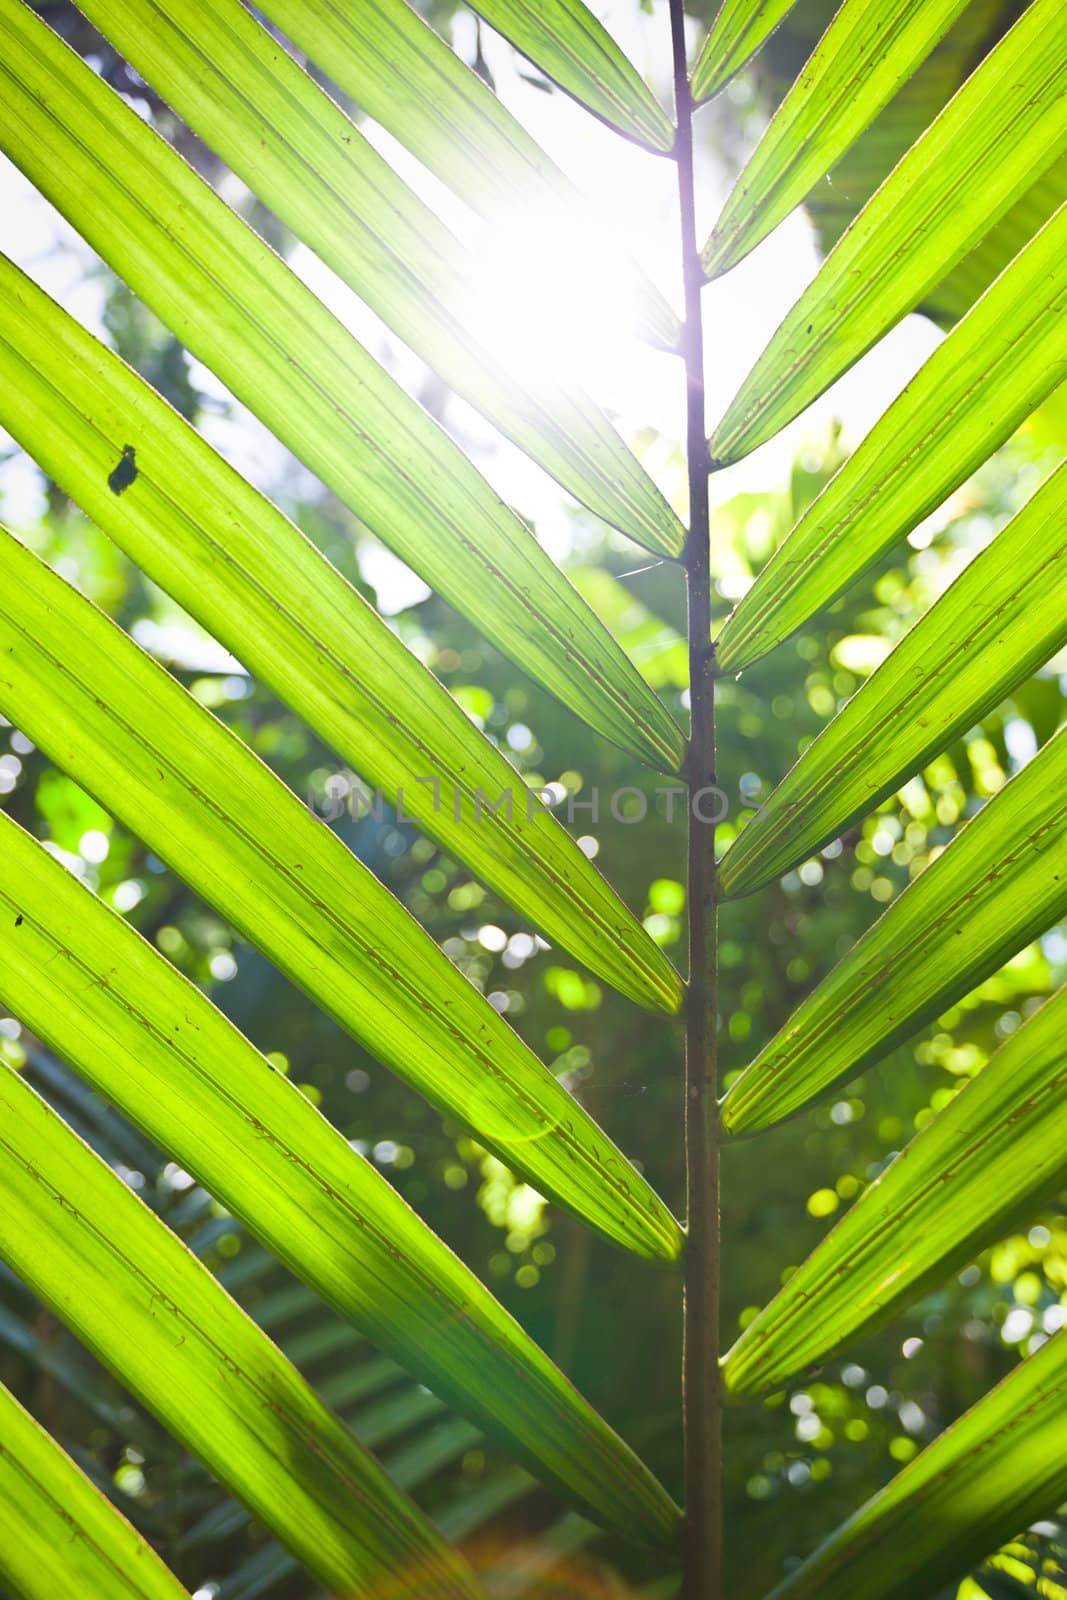 Viewing the sun through a palm frond by jrstock